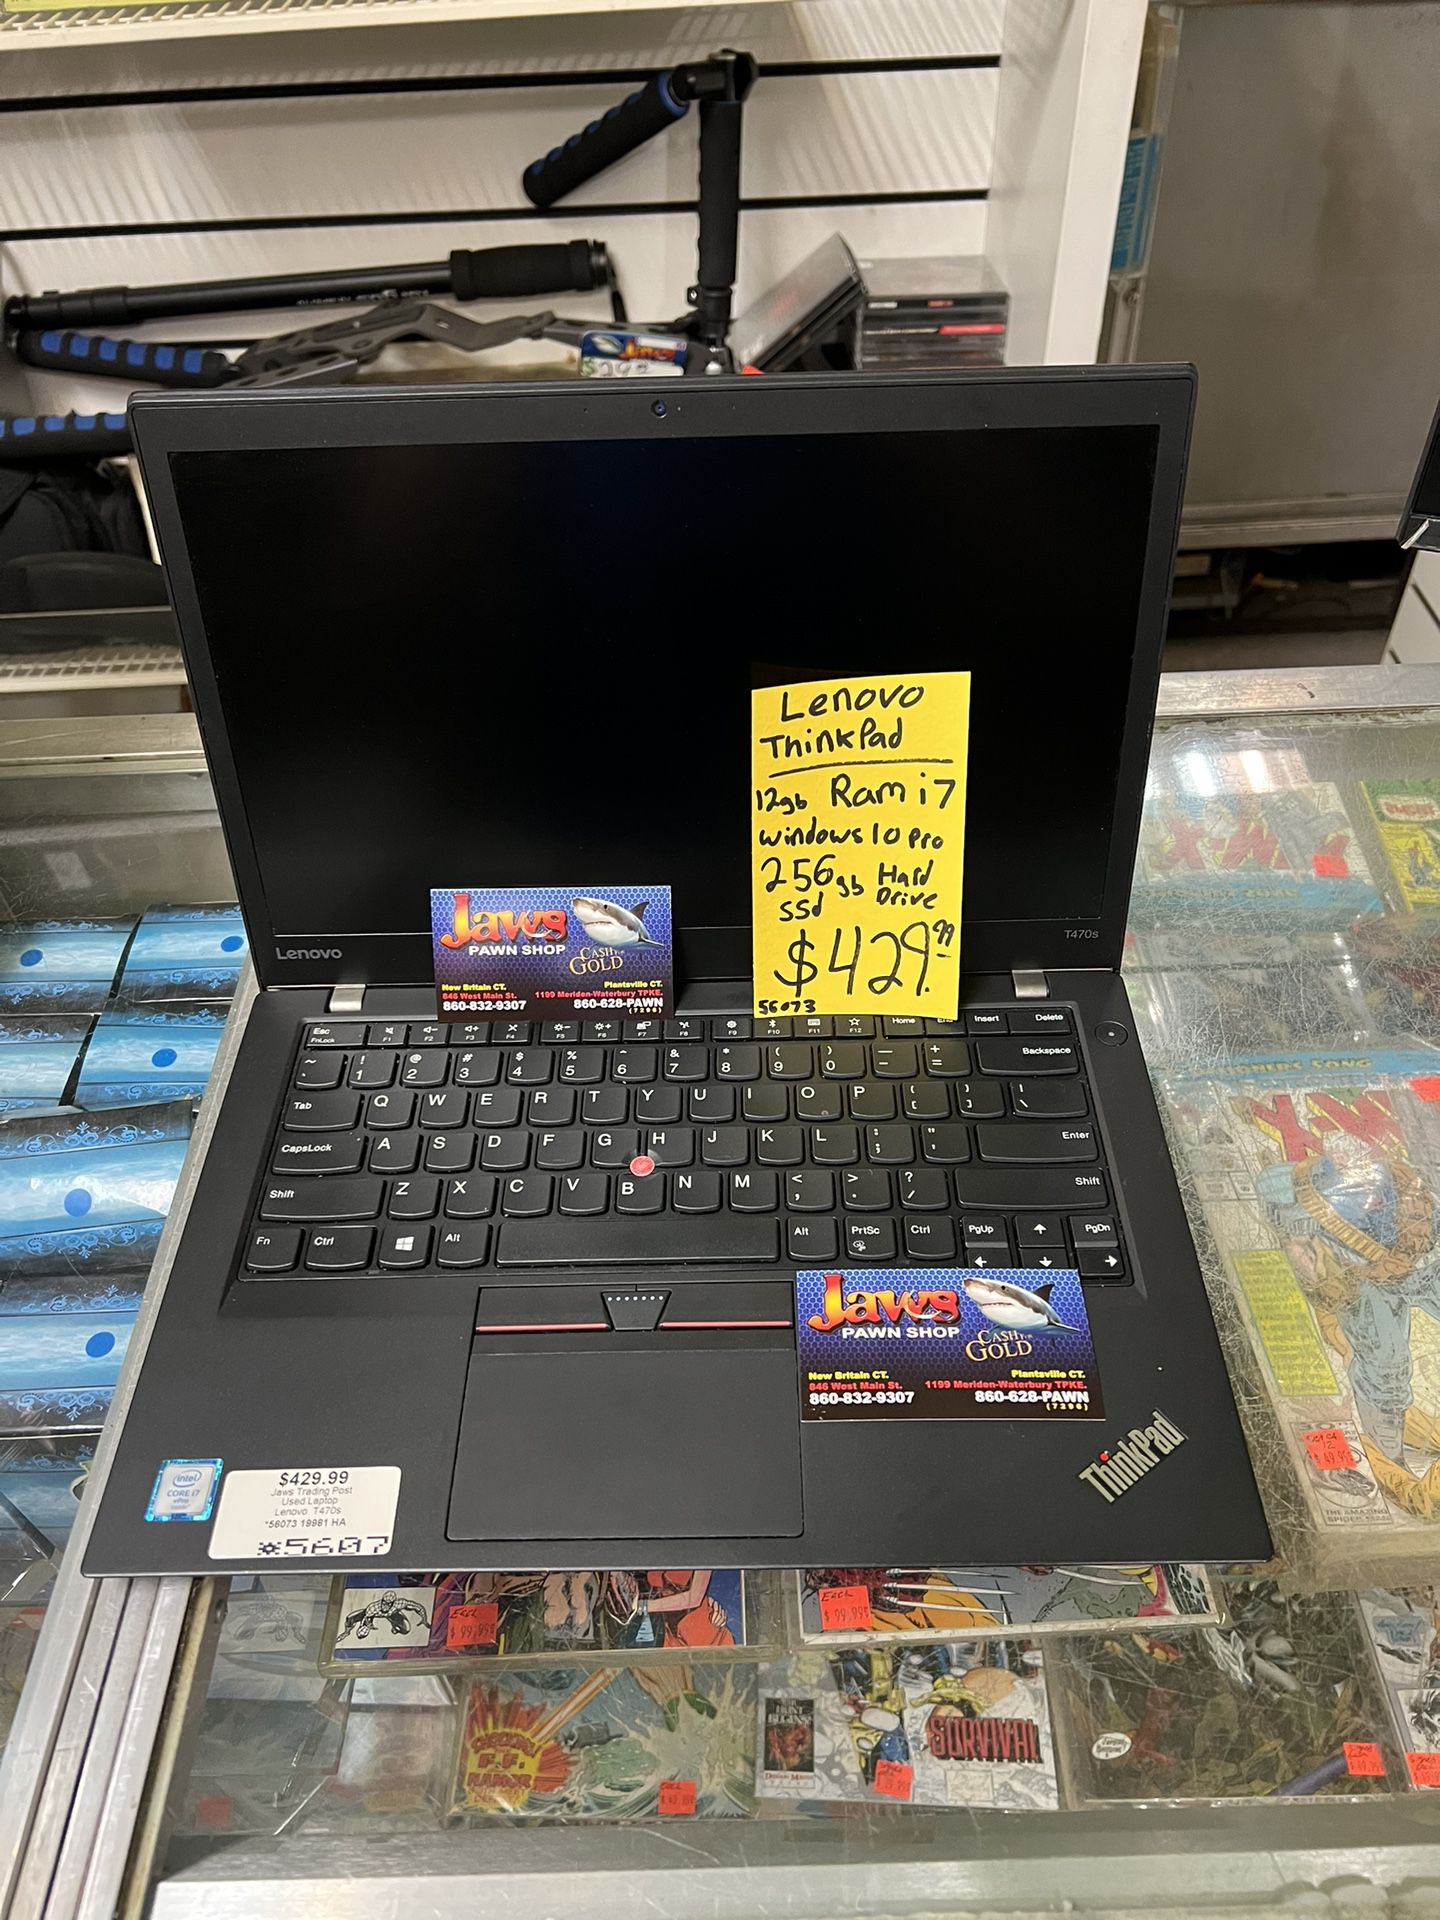 Lenovo Thinkpad Laptop Pick Up Only Many Other Laptops For Sale As Well Come Stop By! 